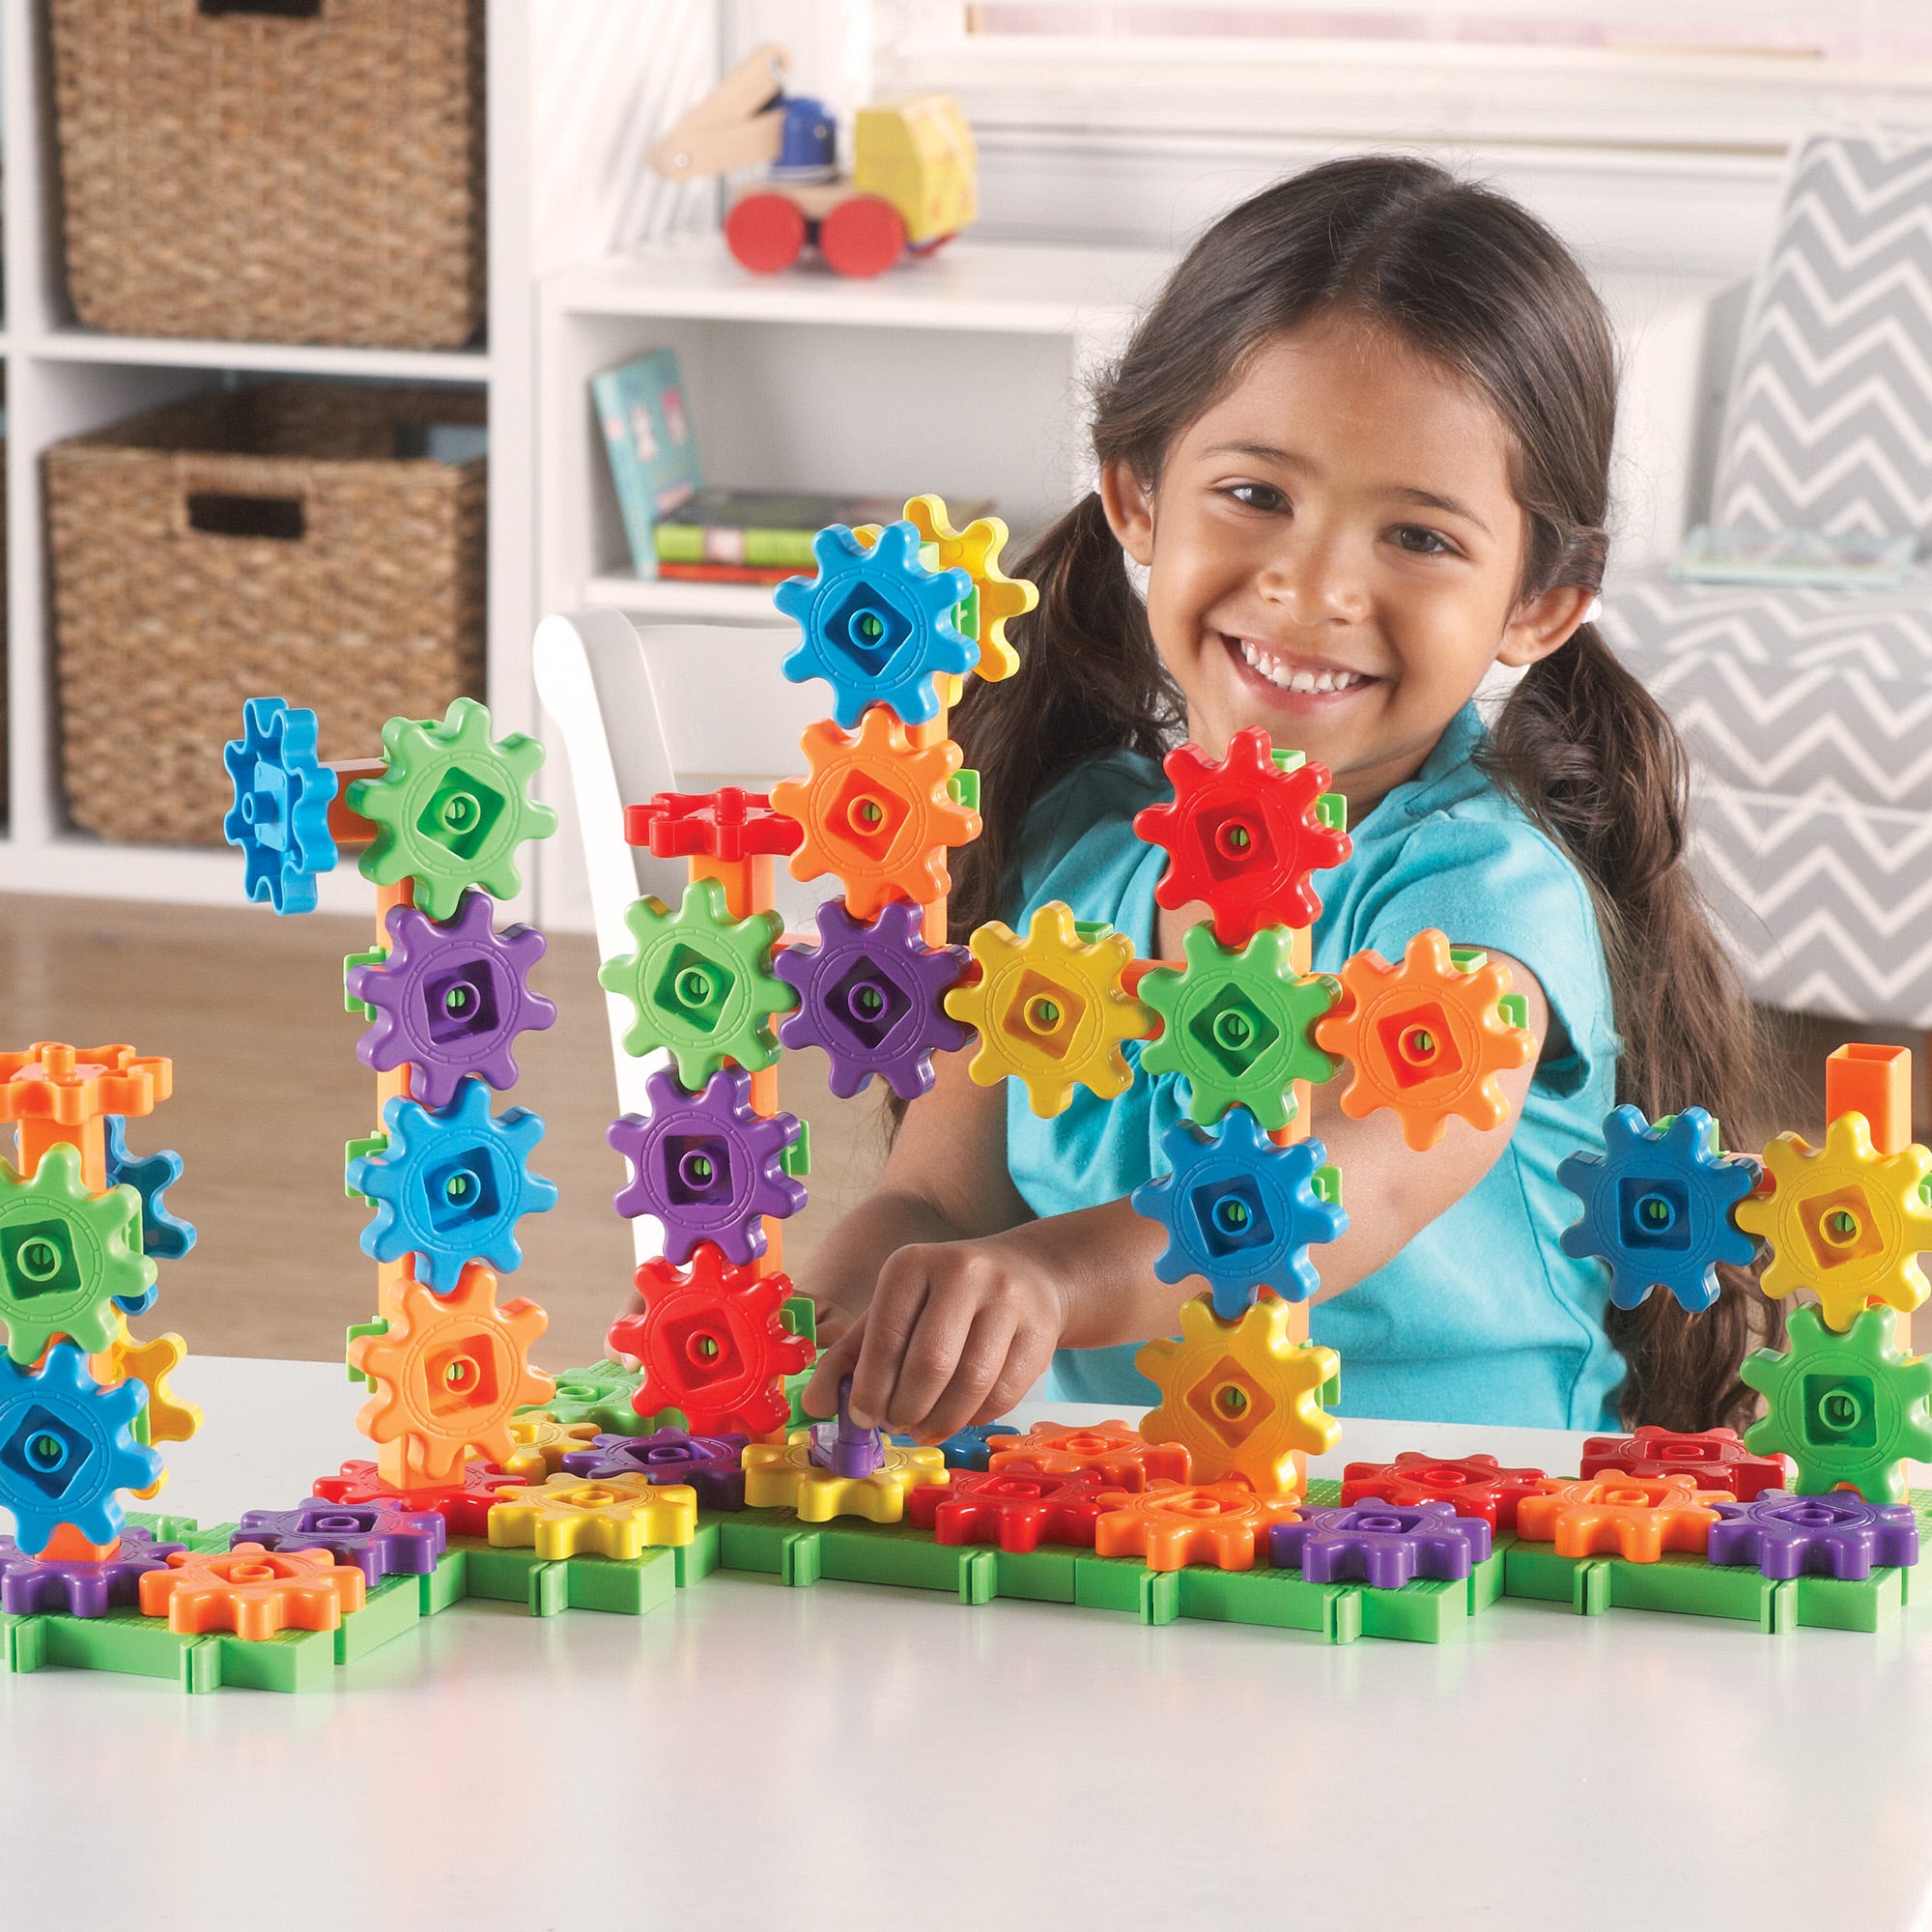 Gears Gears Gears Deluxe Building Set of 100, Fun meets value with this Gears! Gears! Gears Deluxe Building Set of 100. Fine motor skills grow as children build, learn and experiment with this set. Using the gears, cranks, pulleys, interconnecting base plates and connectors, children can develop their problem solving skills as they play. Encourage critical thinking and problem solving with this colourful construction set. Encourages creative thinking as children build anything in their imagination Set will 